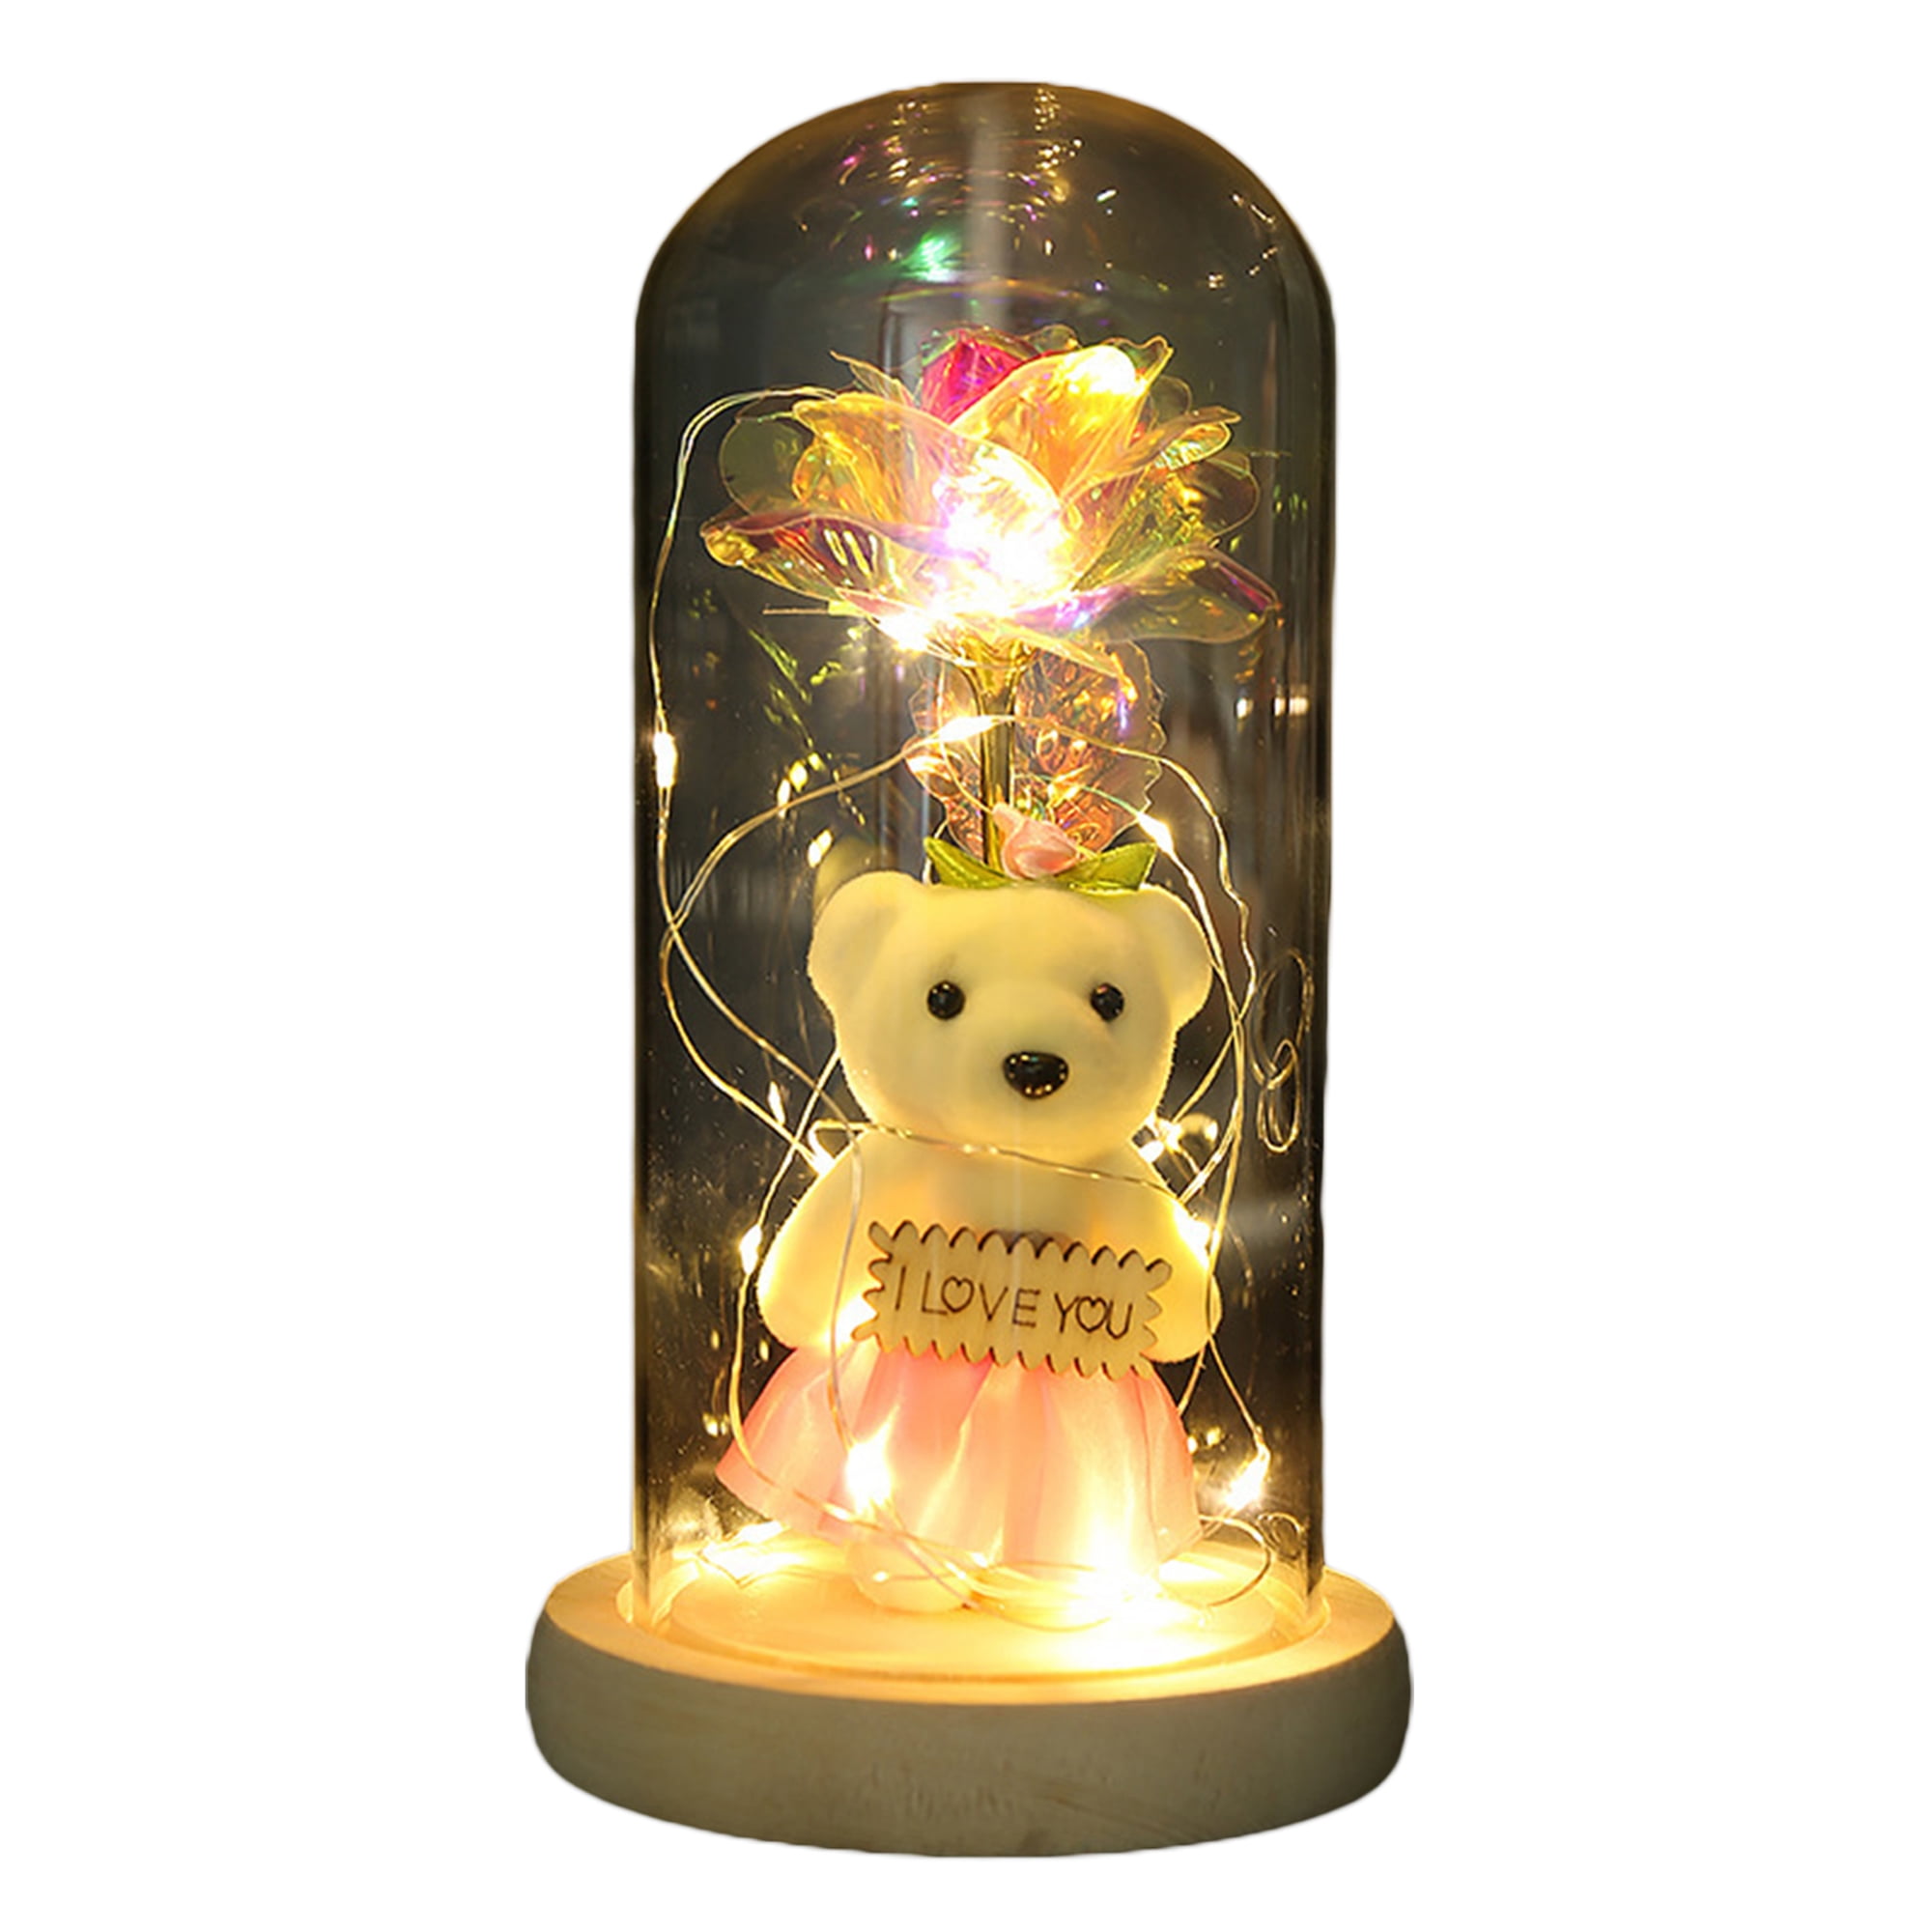 Rose & Bear In Dome Glass LED Night Light Beauty Valentine's Day Xmas Decor Gift 